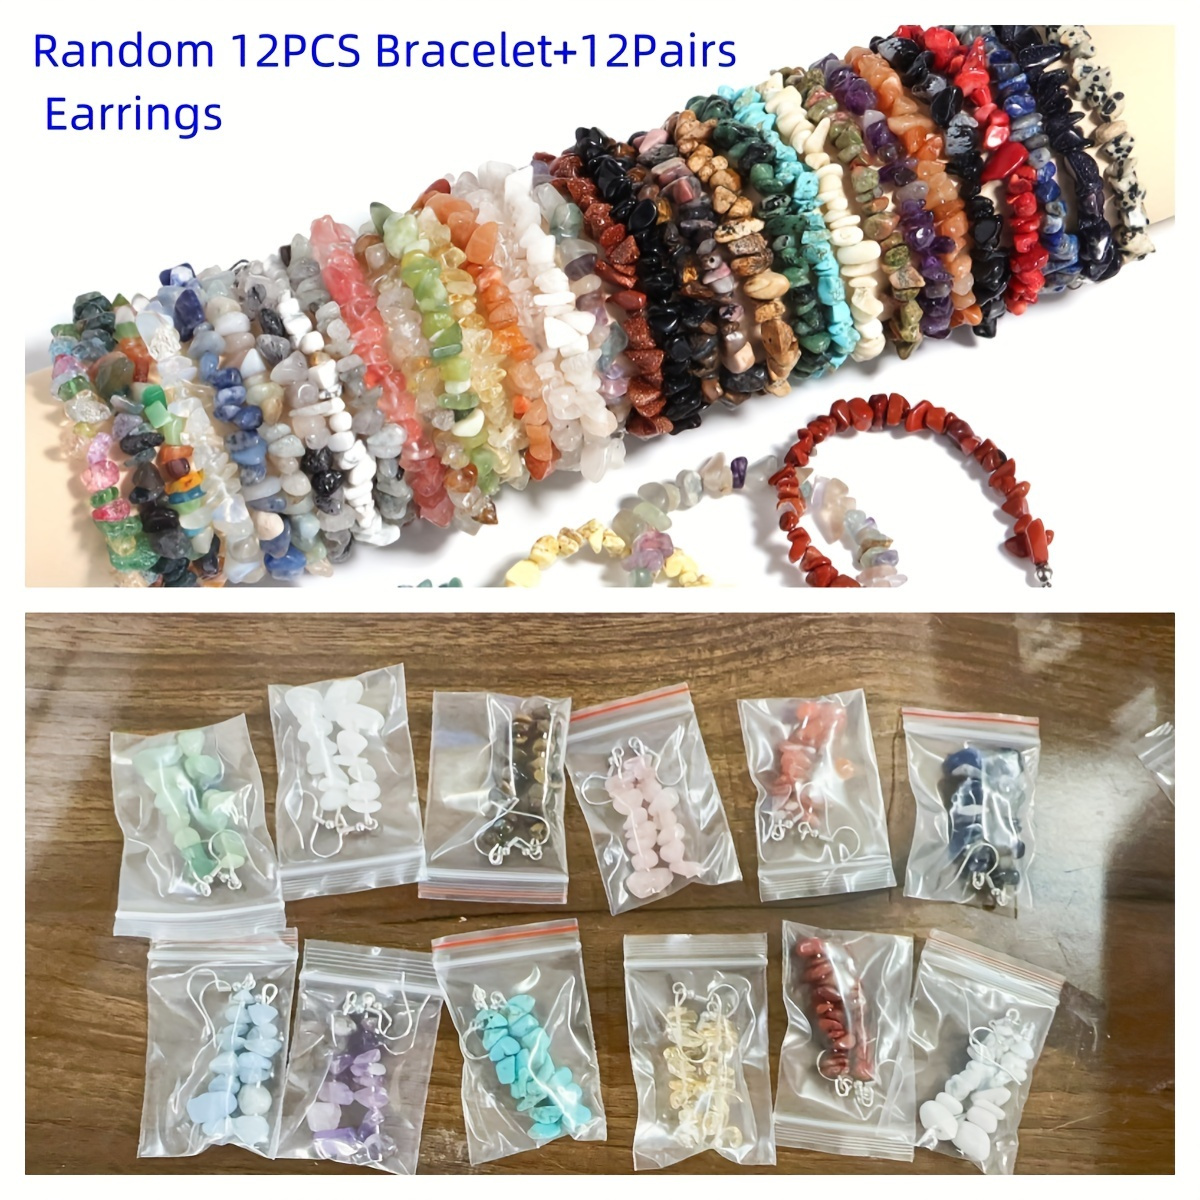 

36-pcs (12strand Bracelet+12pairs Earrings Set) Handmade Natural Stone Bracelet With Earrings For Women And Men For Birthday Party And Gifts Irregular Design For Unique Style Halloween Christmas Gift